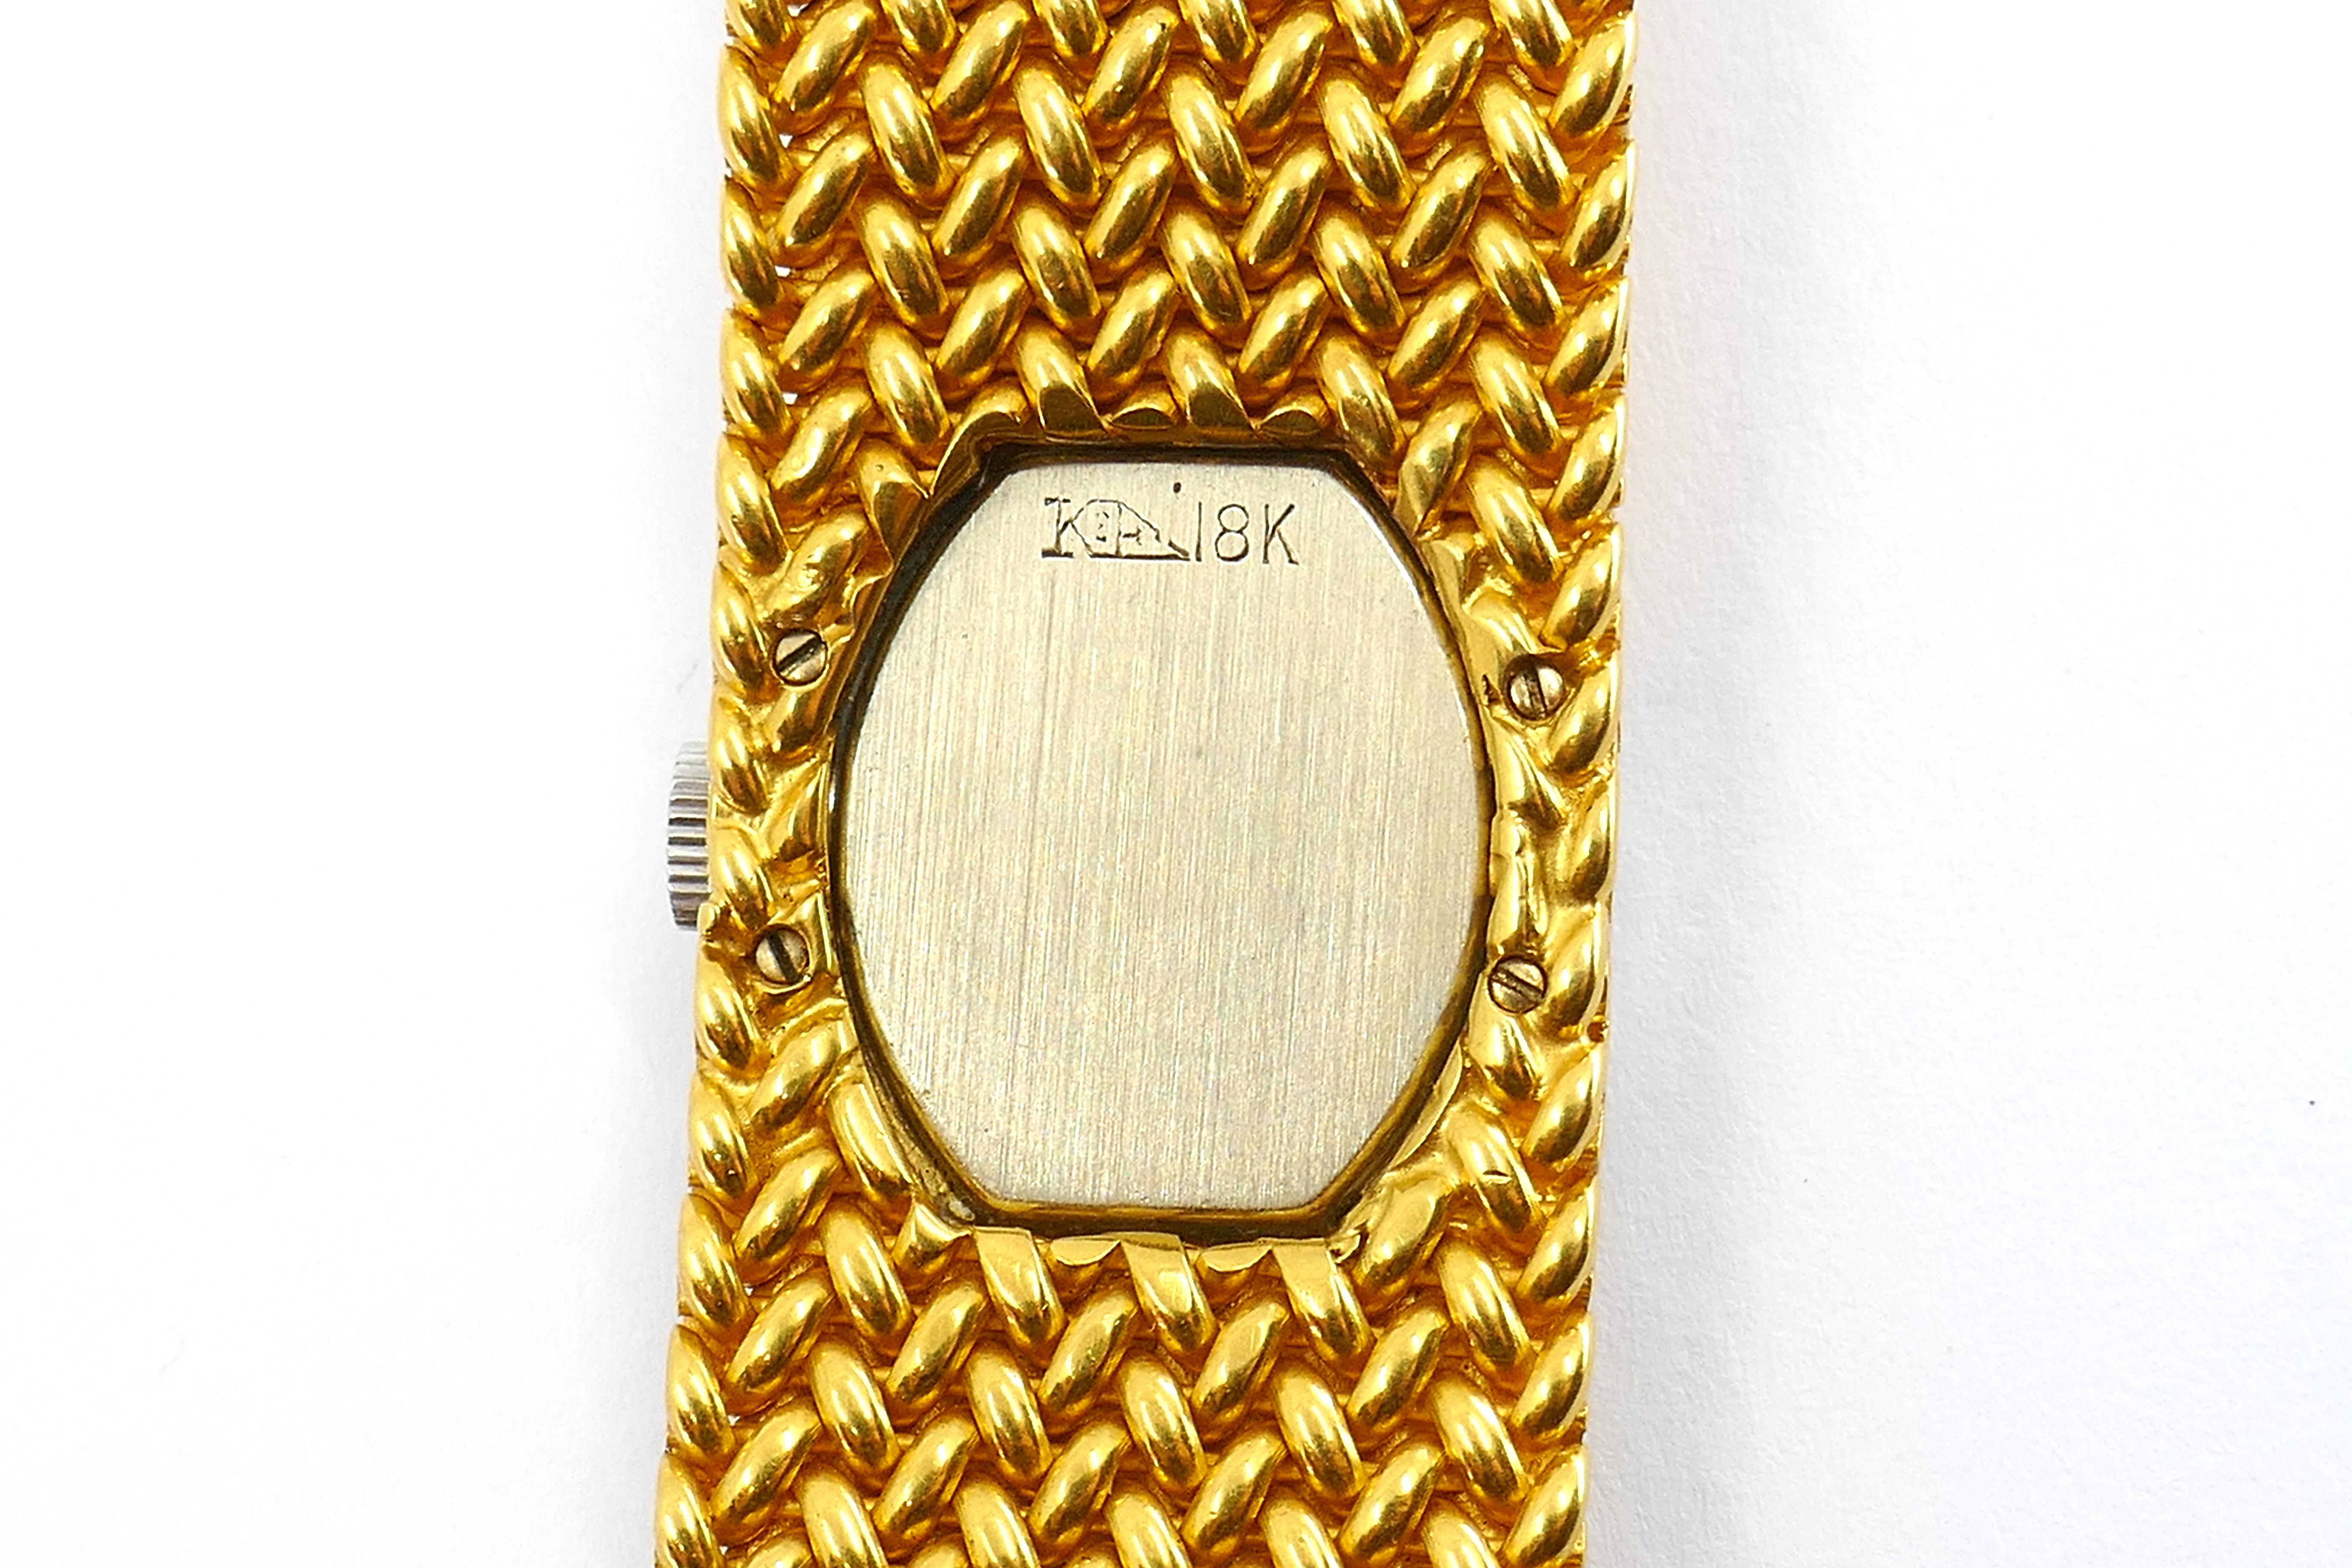 Vintage Cartier 18k Gold Diamond Braided Watch For Sale 8